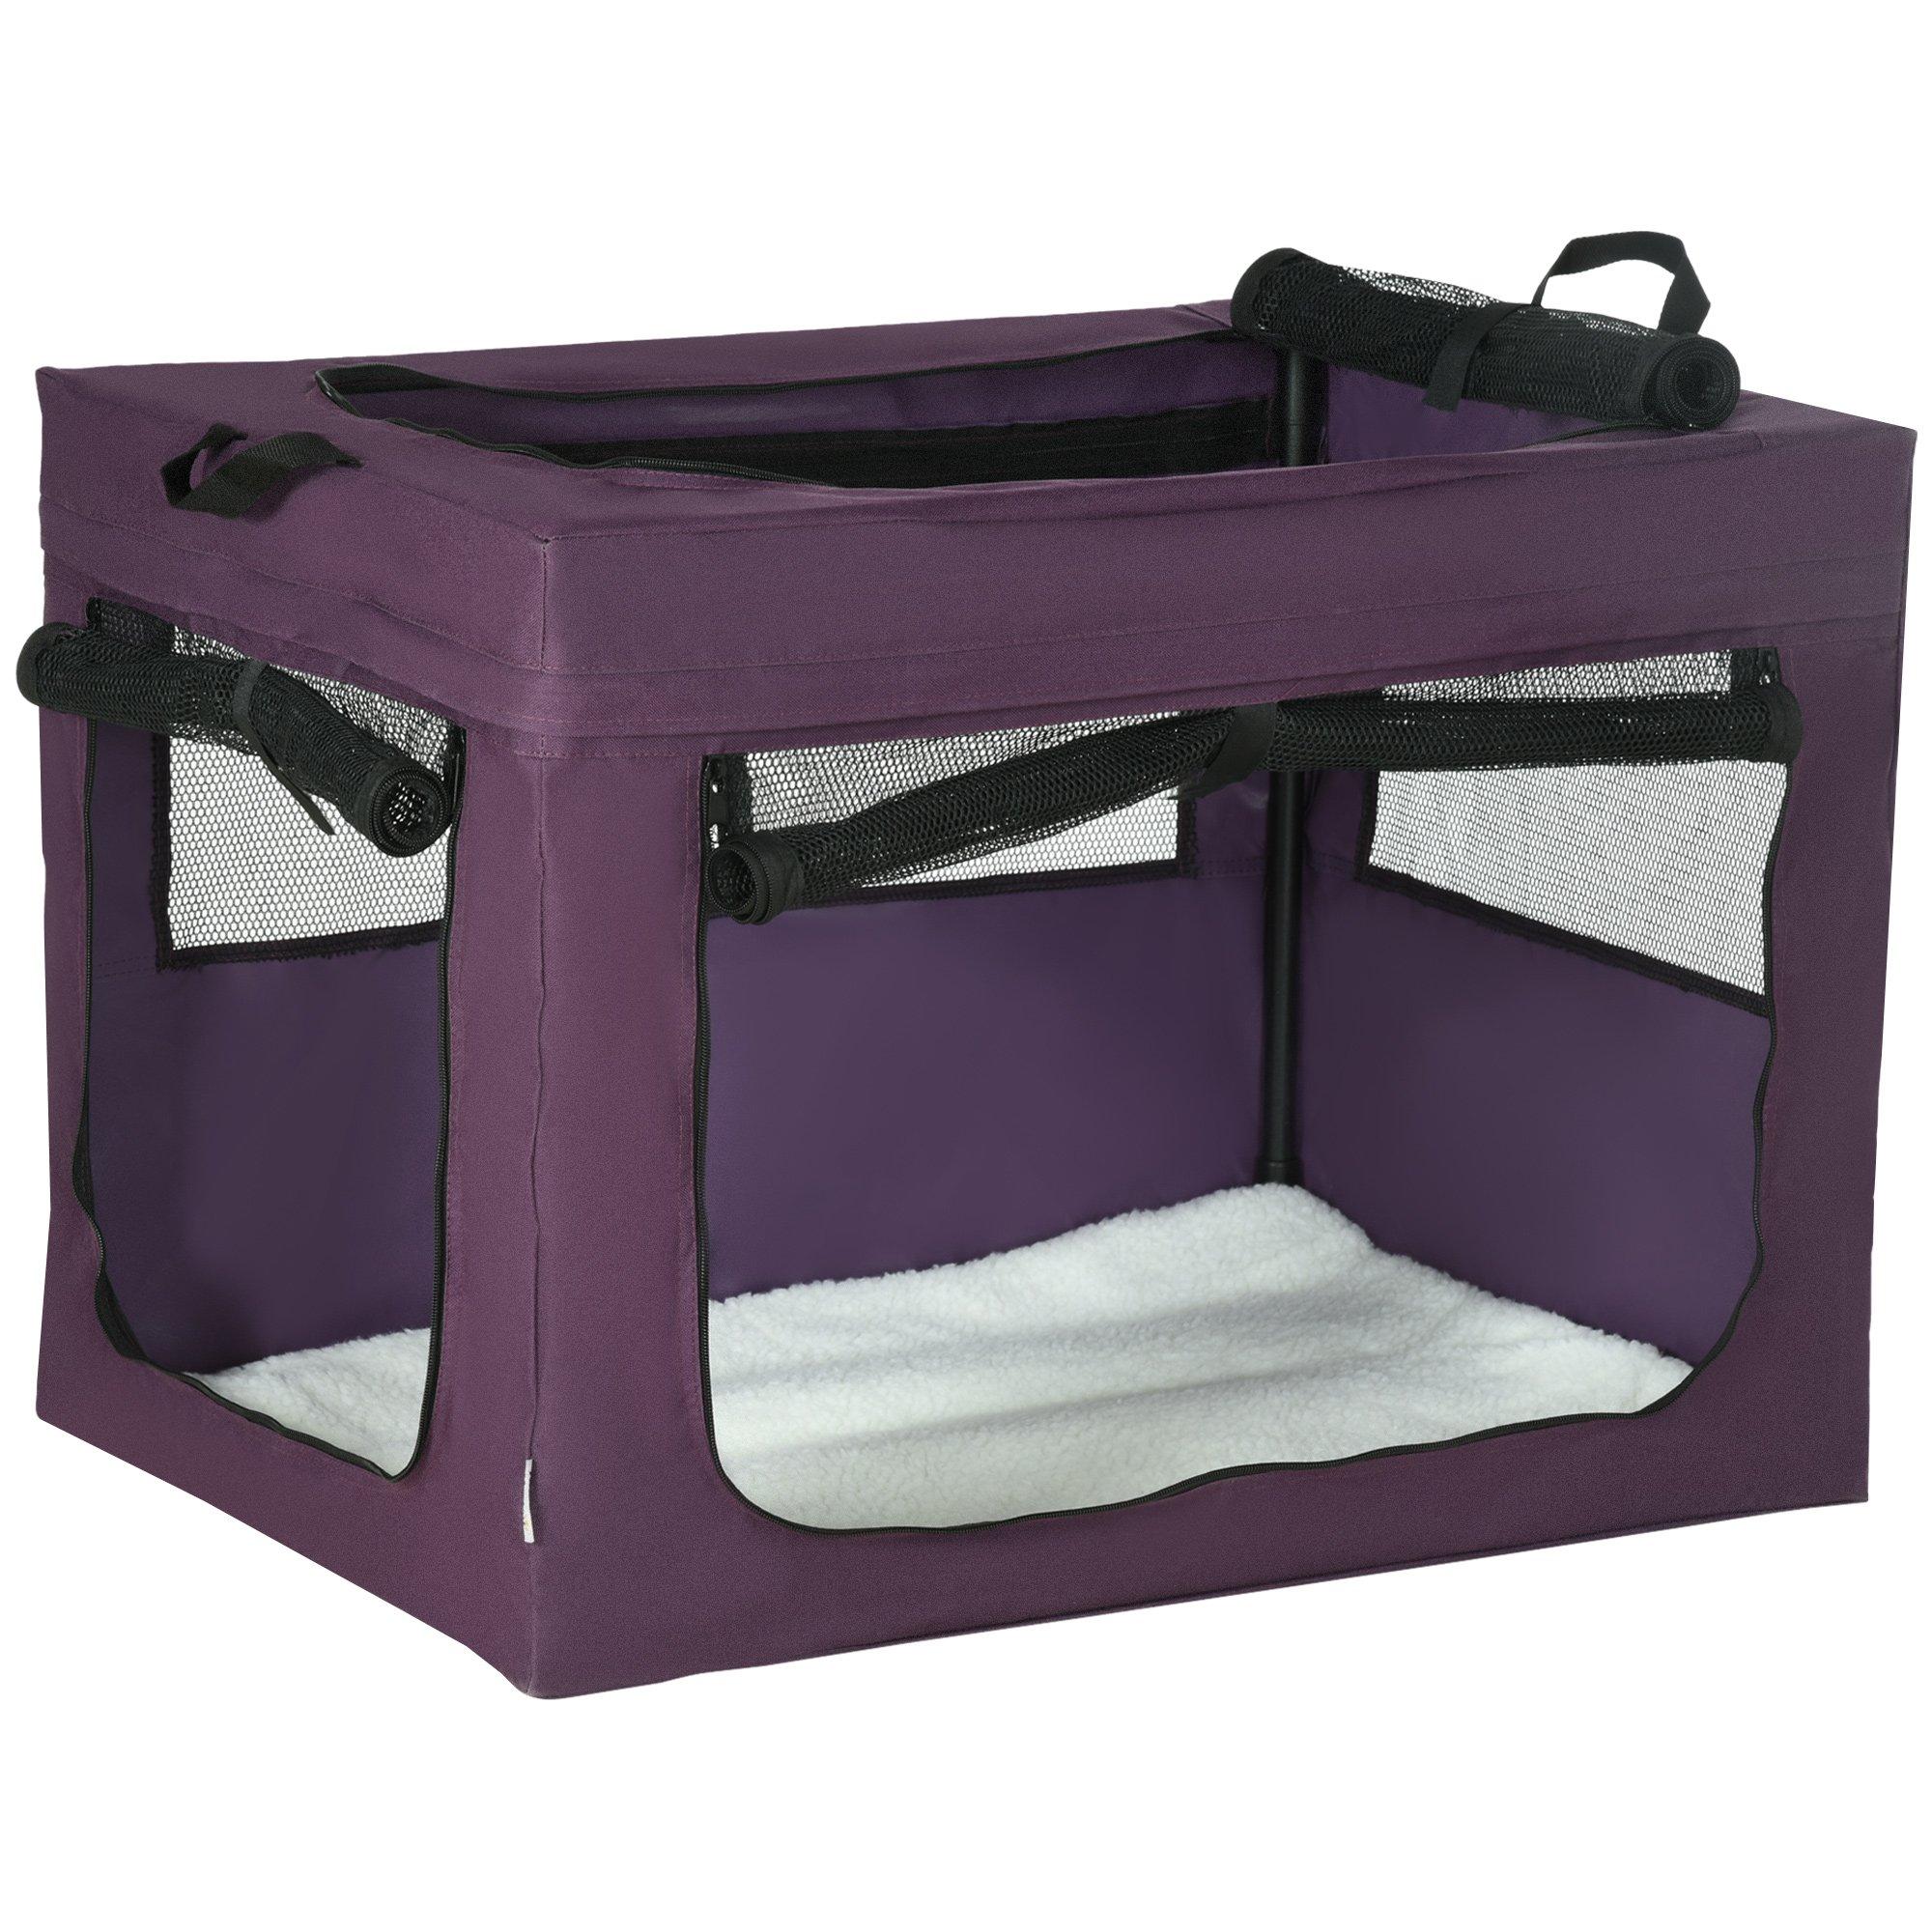 80cm Pet Carrier, Soft Side Pet Travel Crate with Mat for Medium Dogs